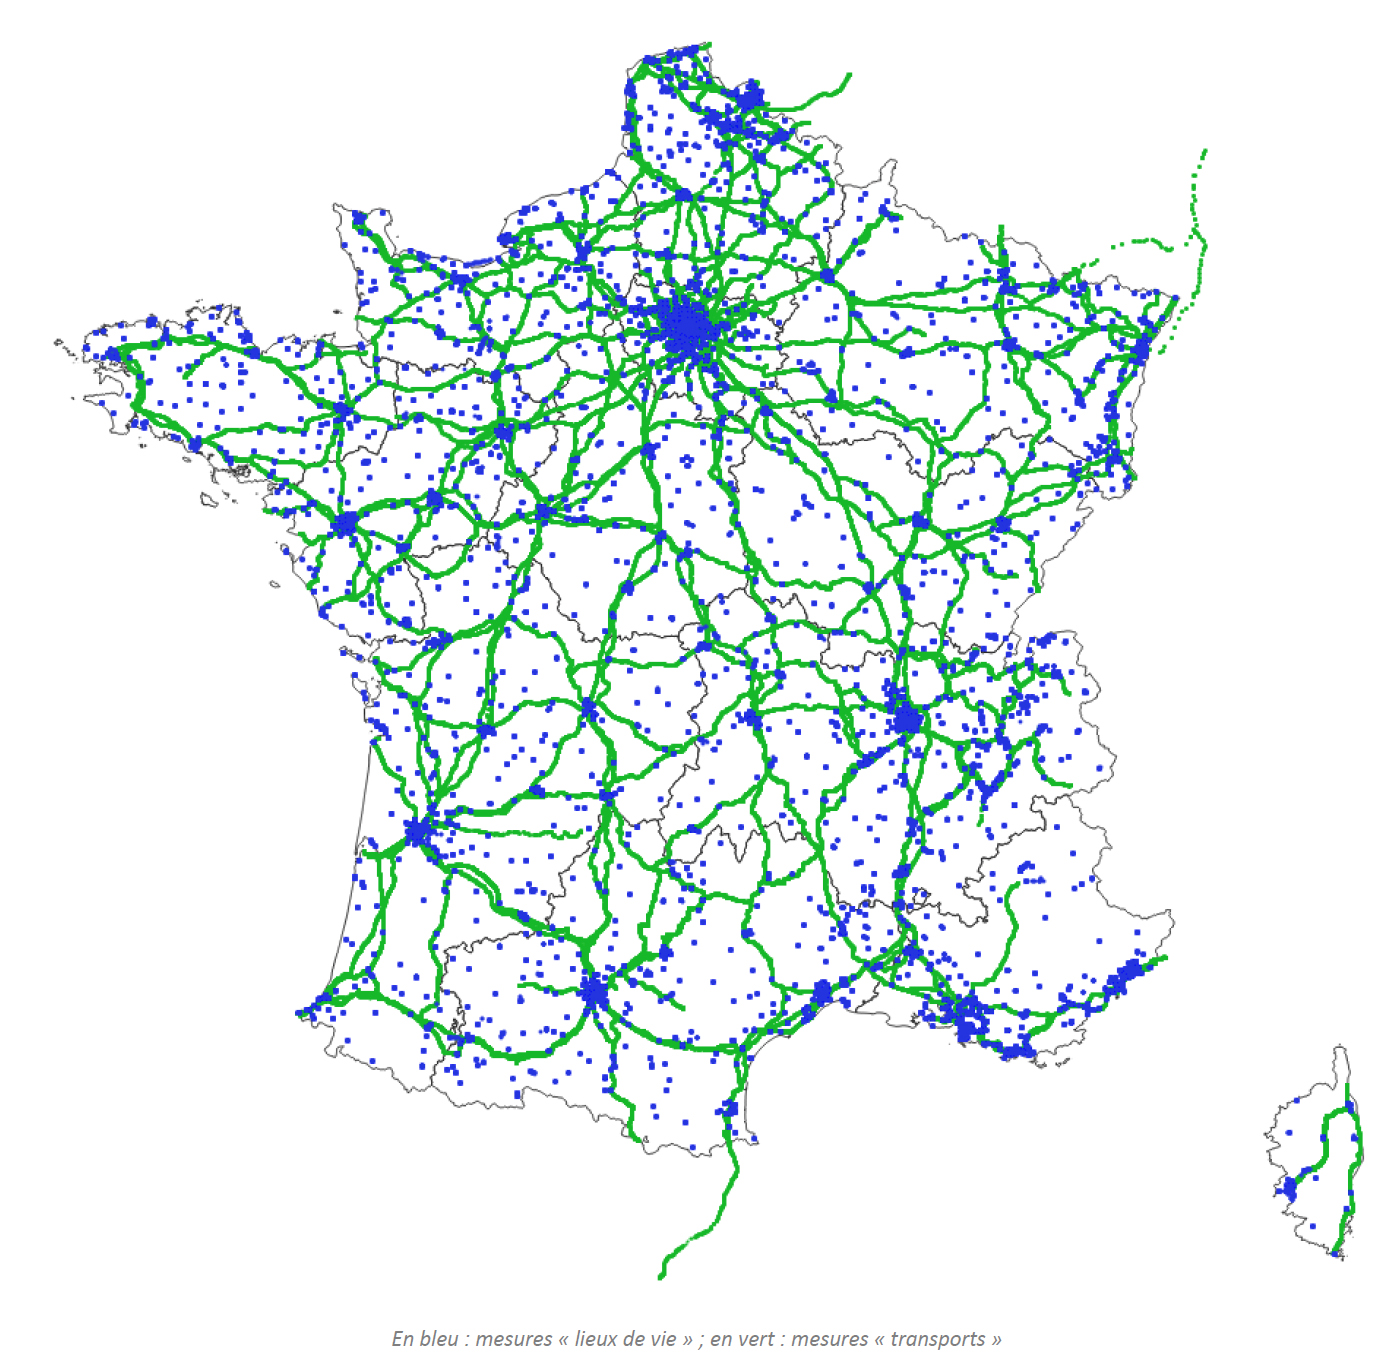 In blue: measurements of “living environments”; in green: measurements of “transport corridors” 